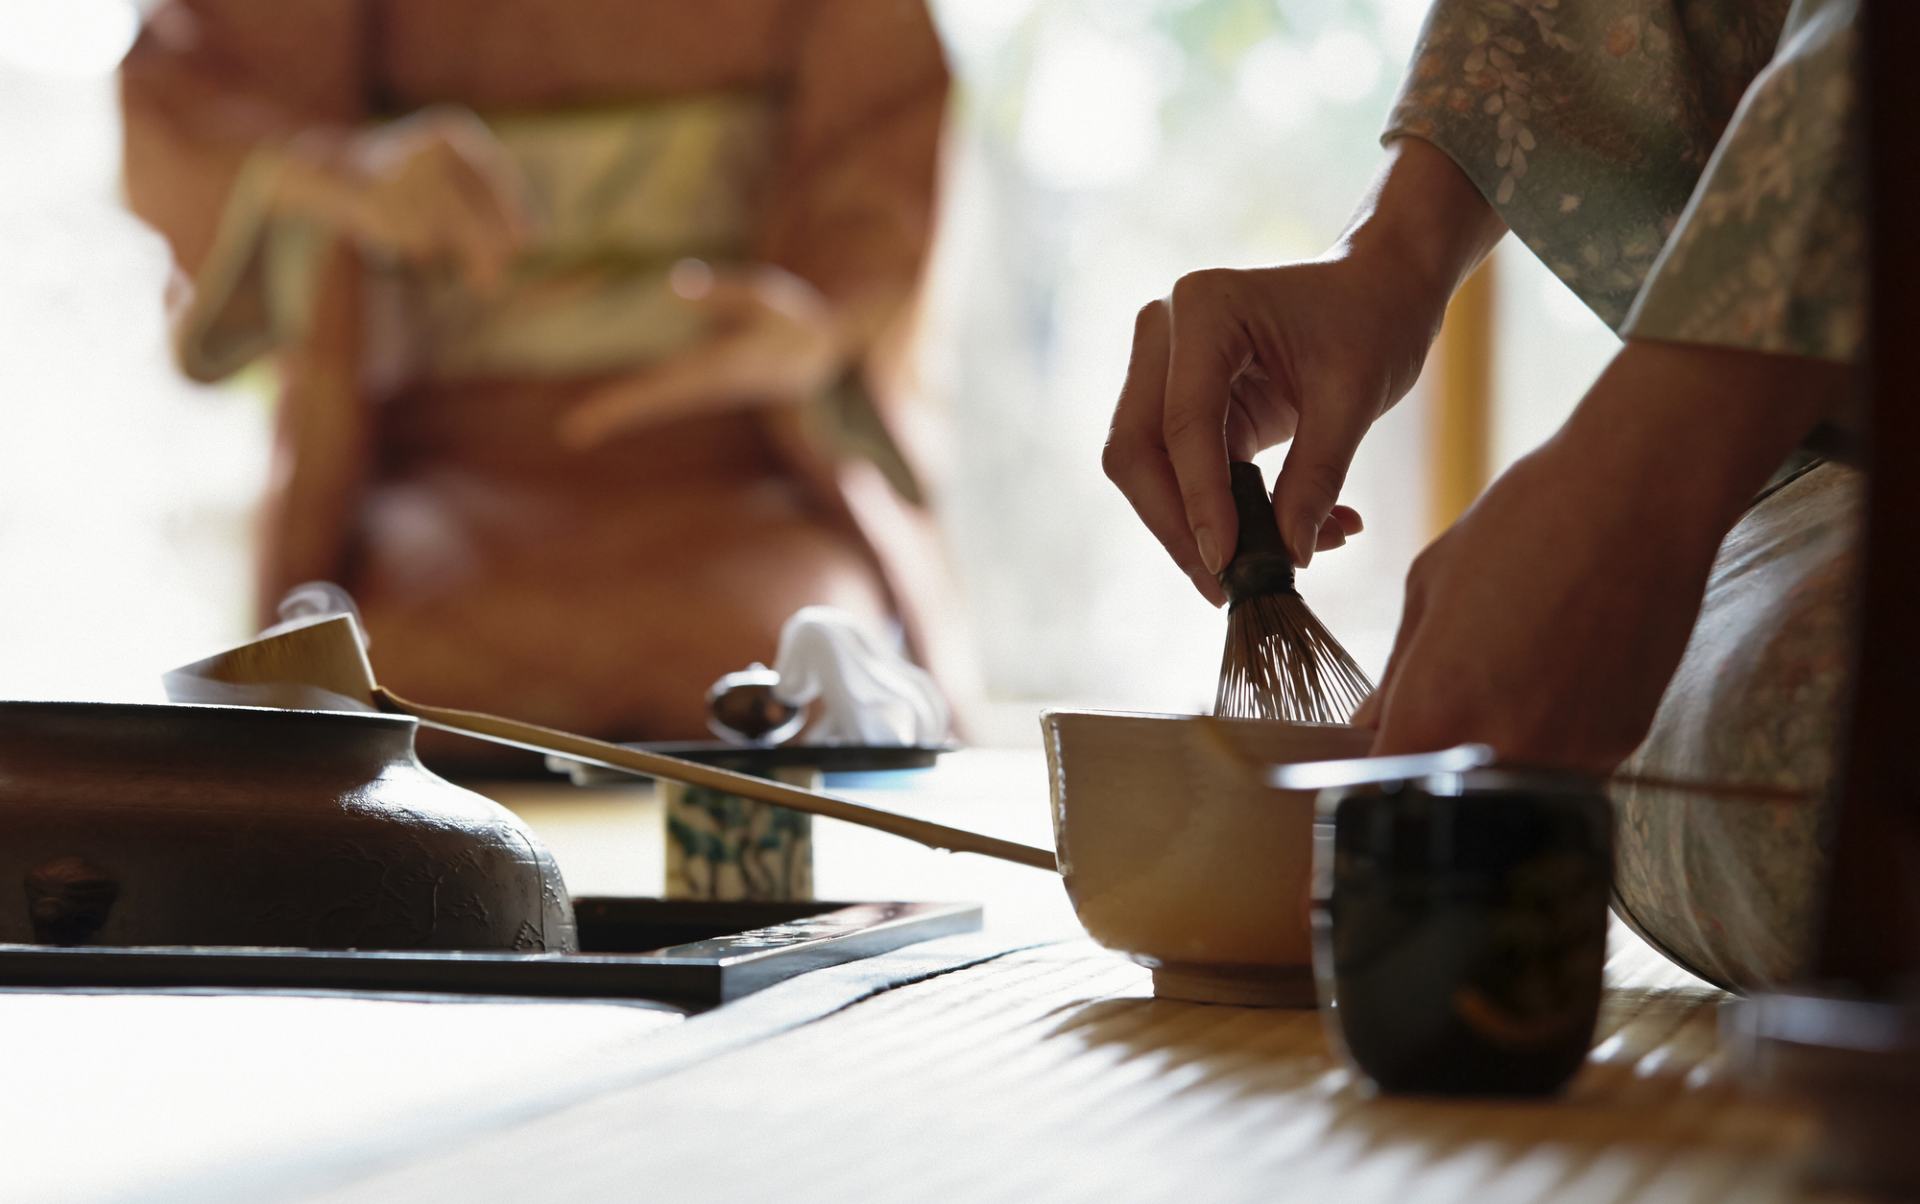 Learn about the spirit of hospitality and the aesthetic principles through the traditional culture of the tea ceremony.